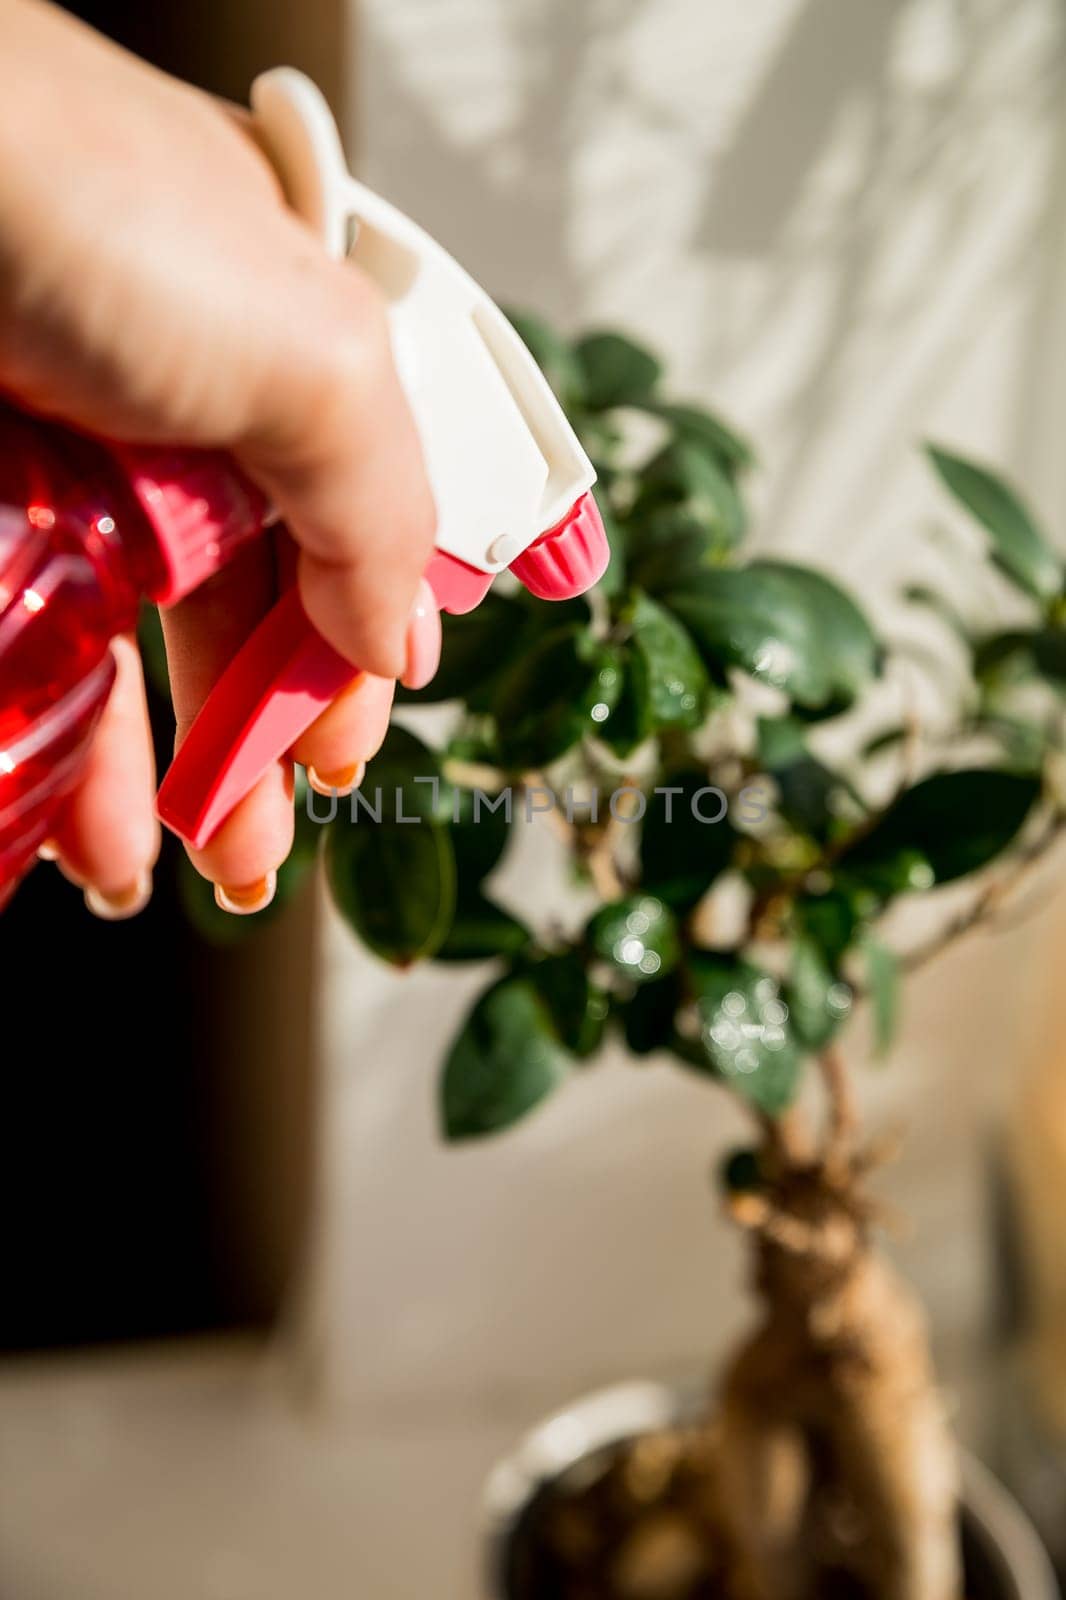 Hand spraying houseplants with a spray bottle